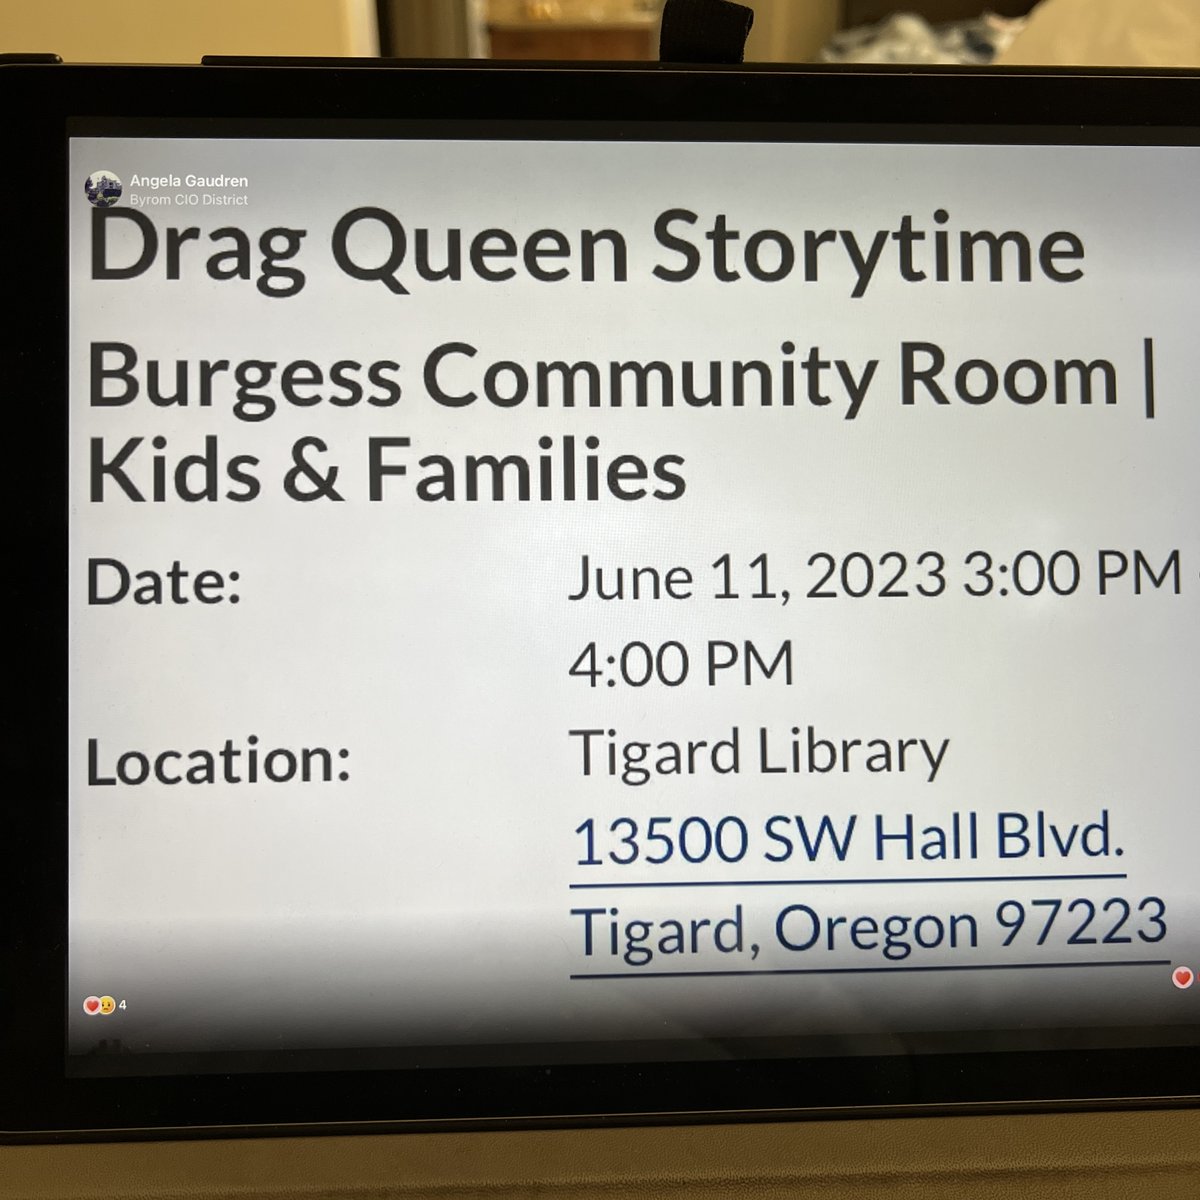 What do you all think about this drag queen story time at the Tigard public library?